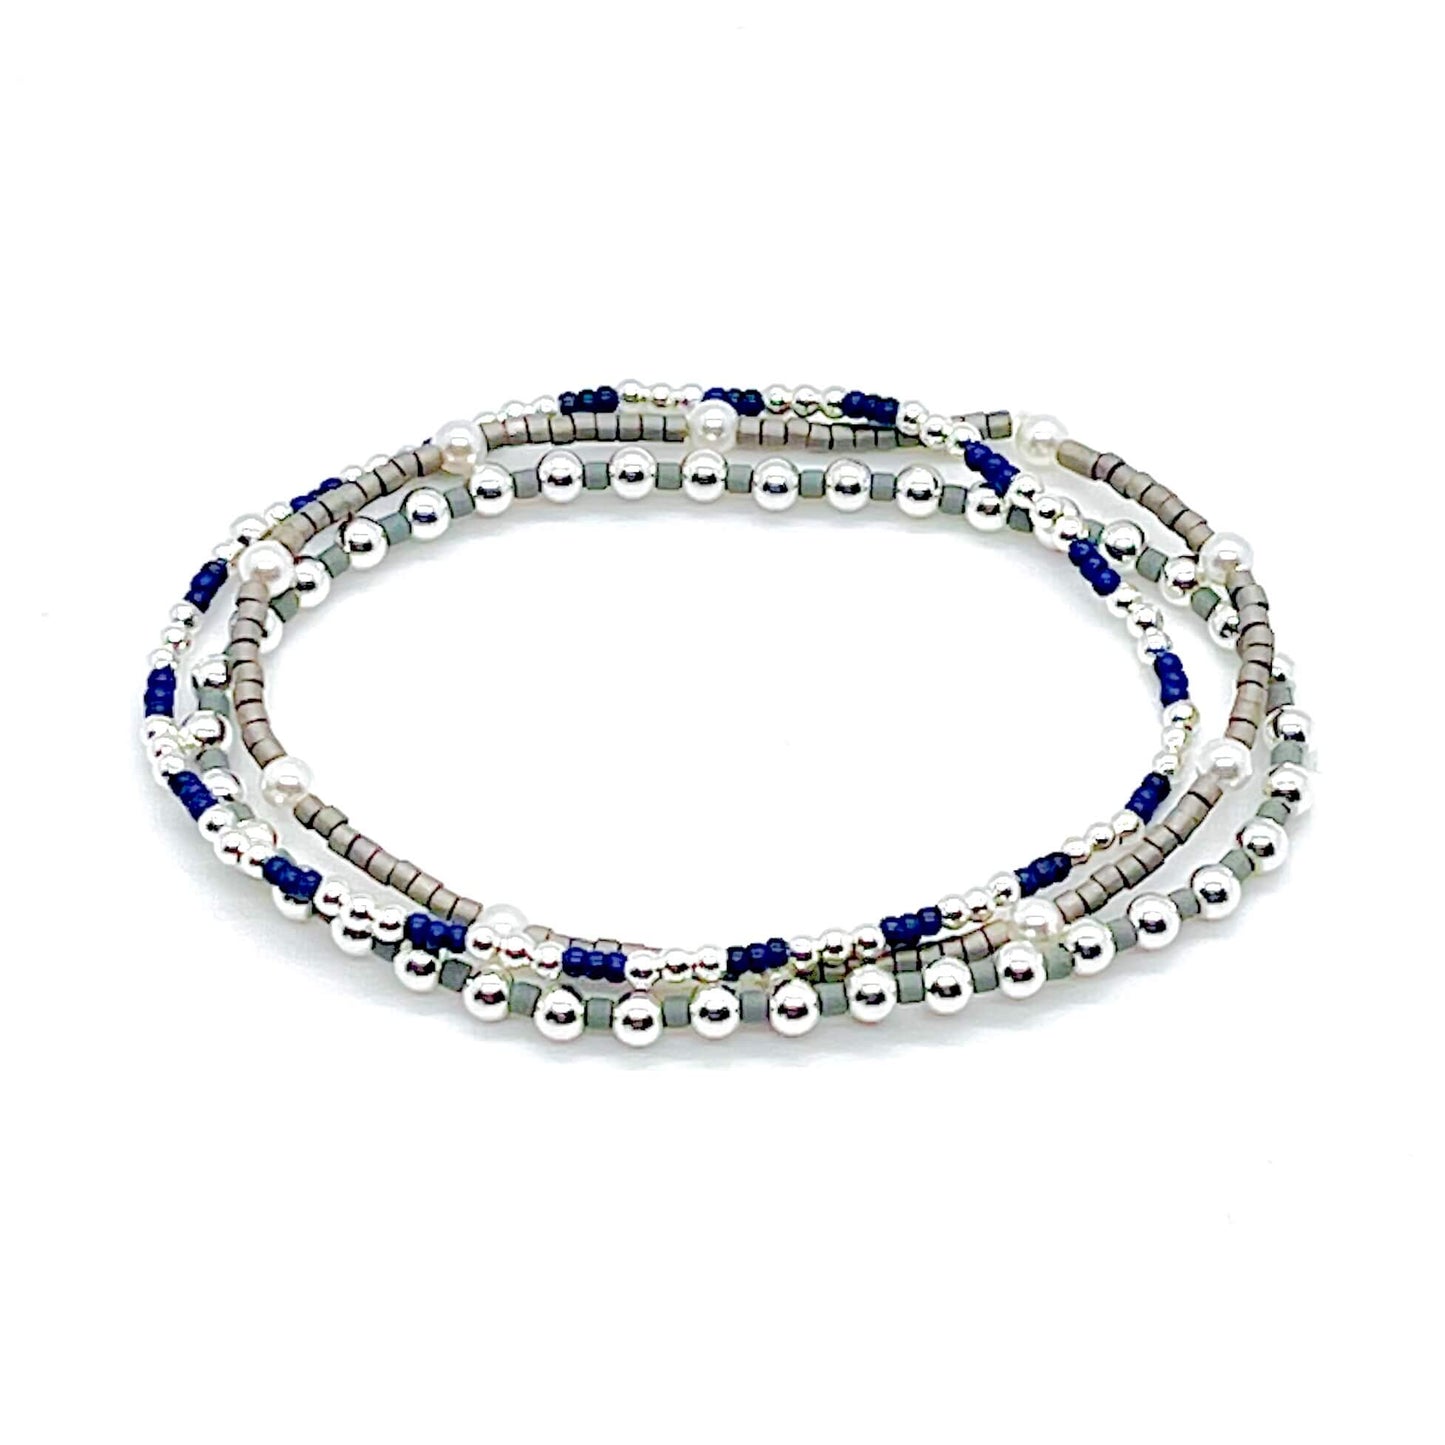 Blue, gray and pearl, silver ball beaded stretch bracelet trio.